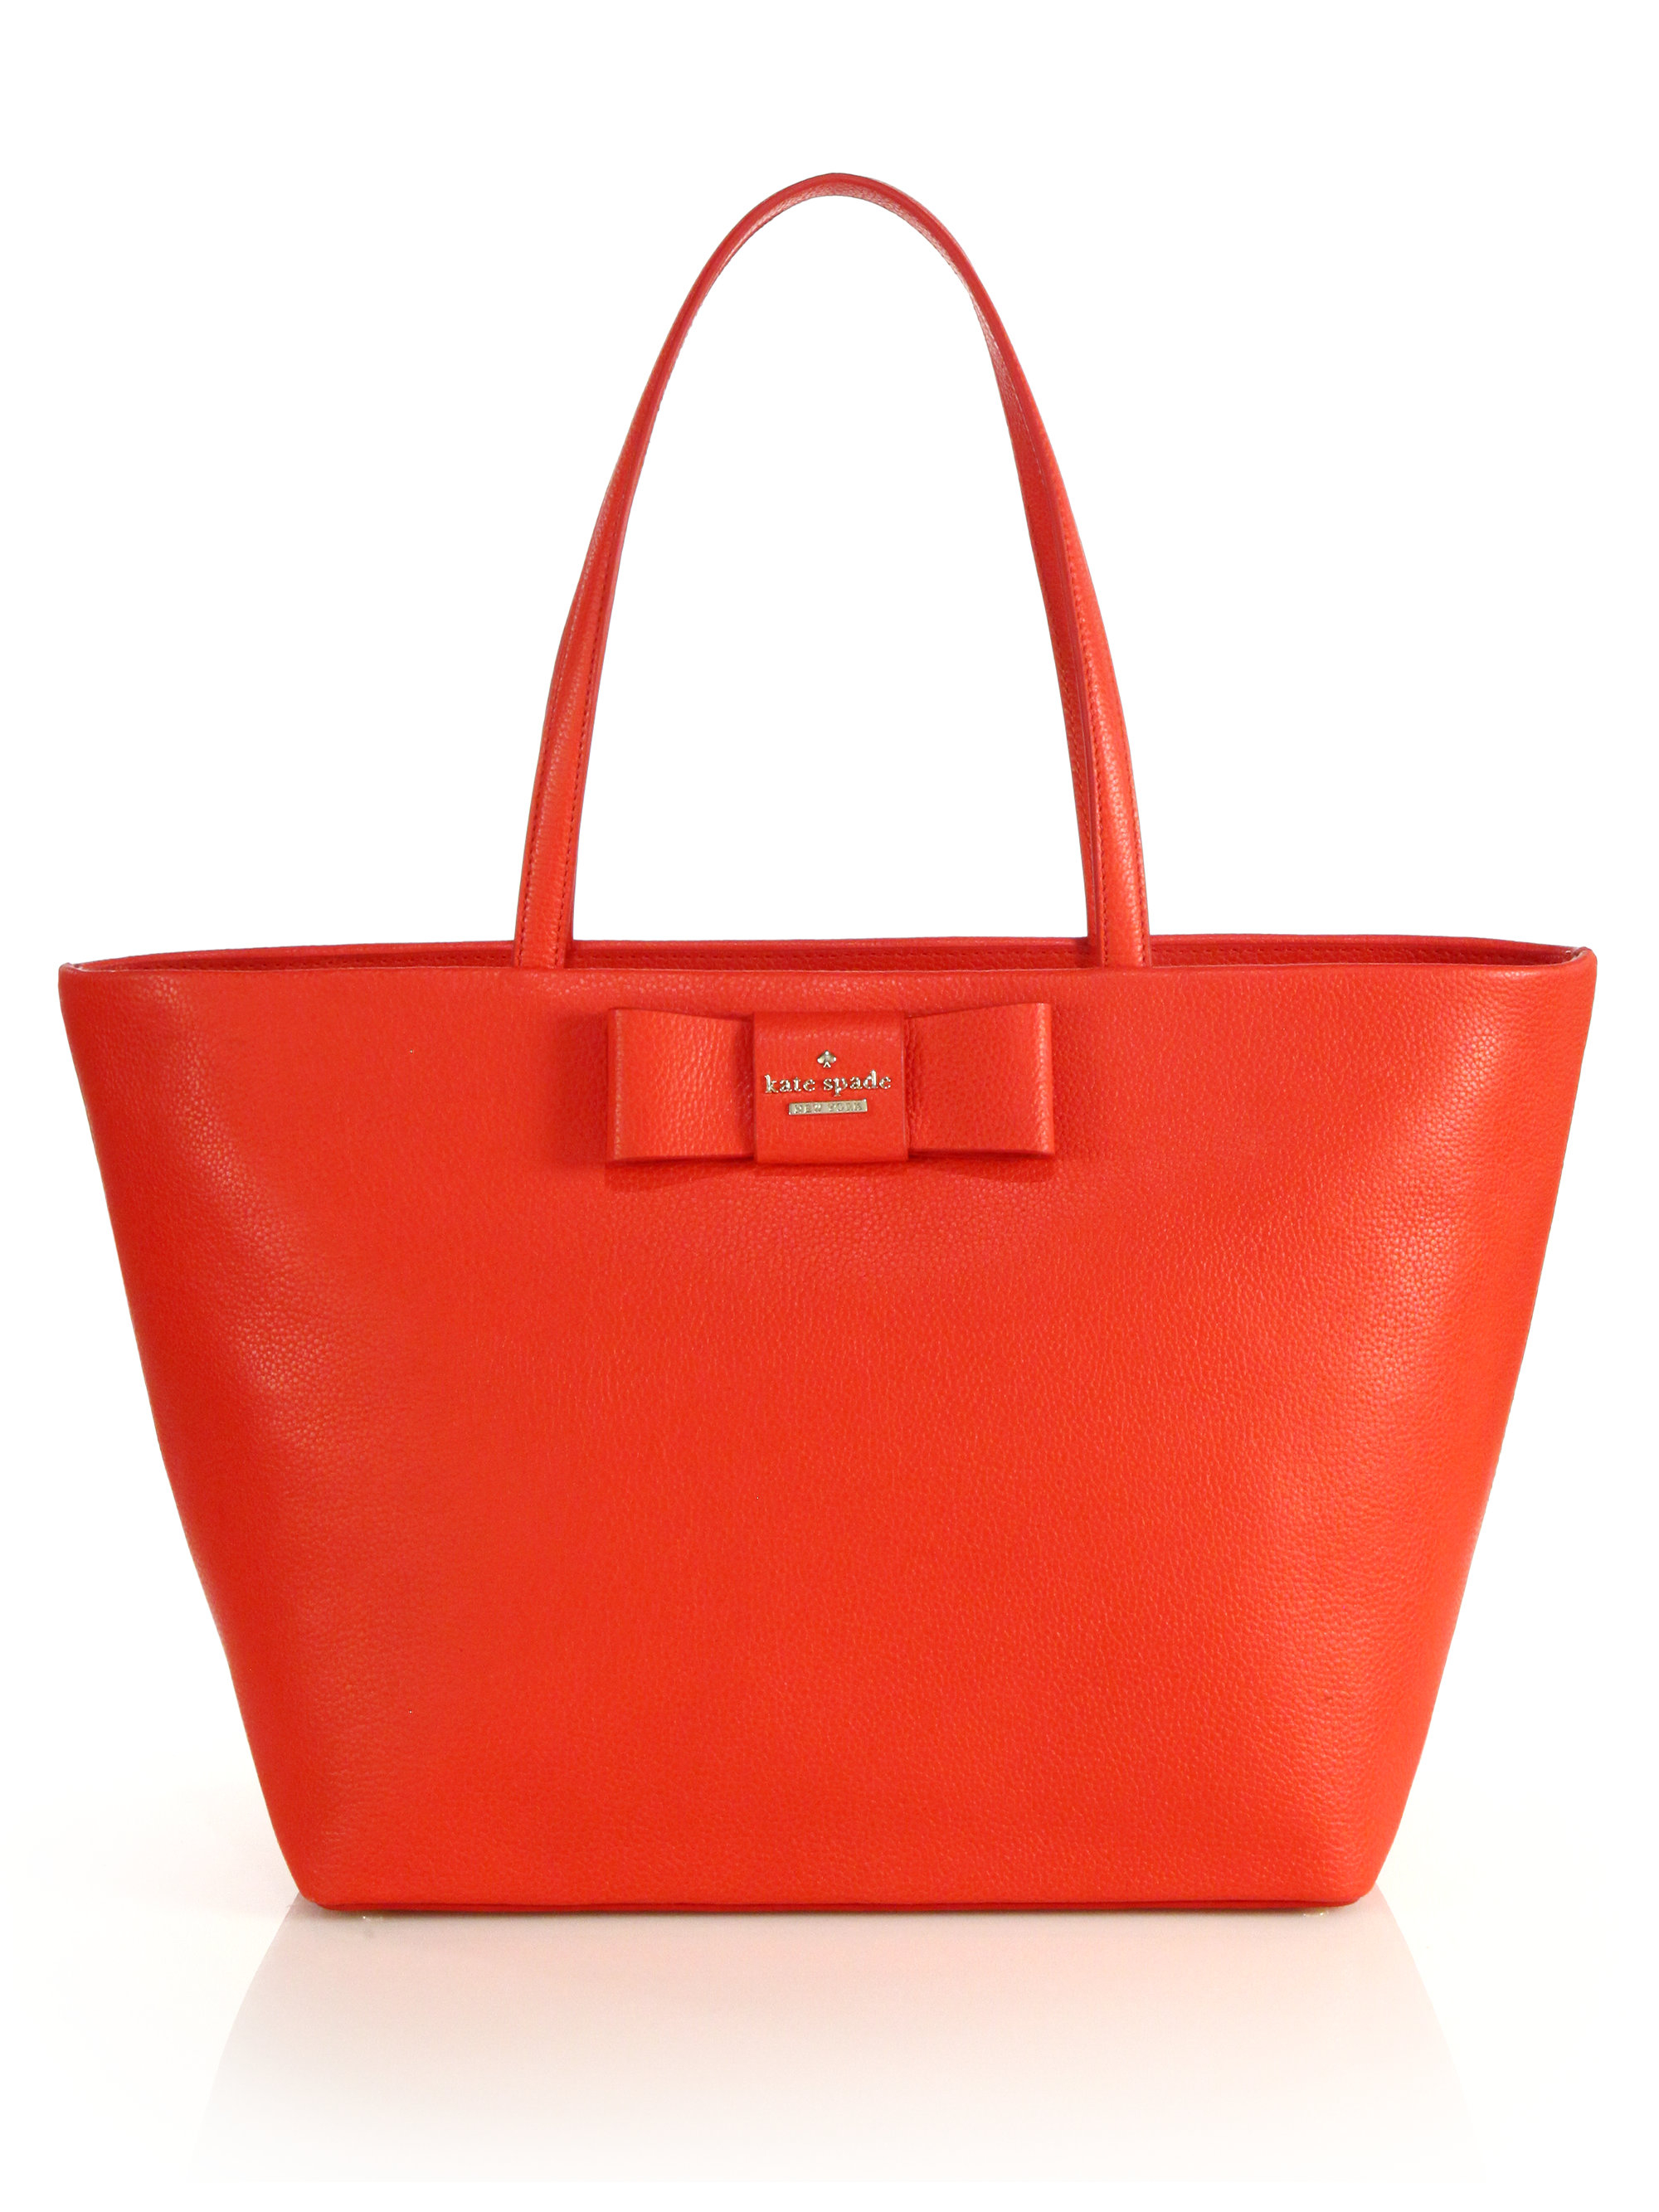 Lyst - Kate spade new york Harmony Small Leather Tote in Red